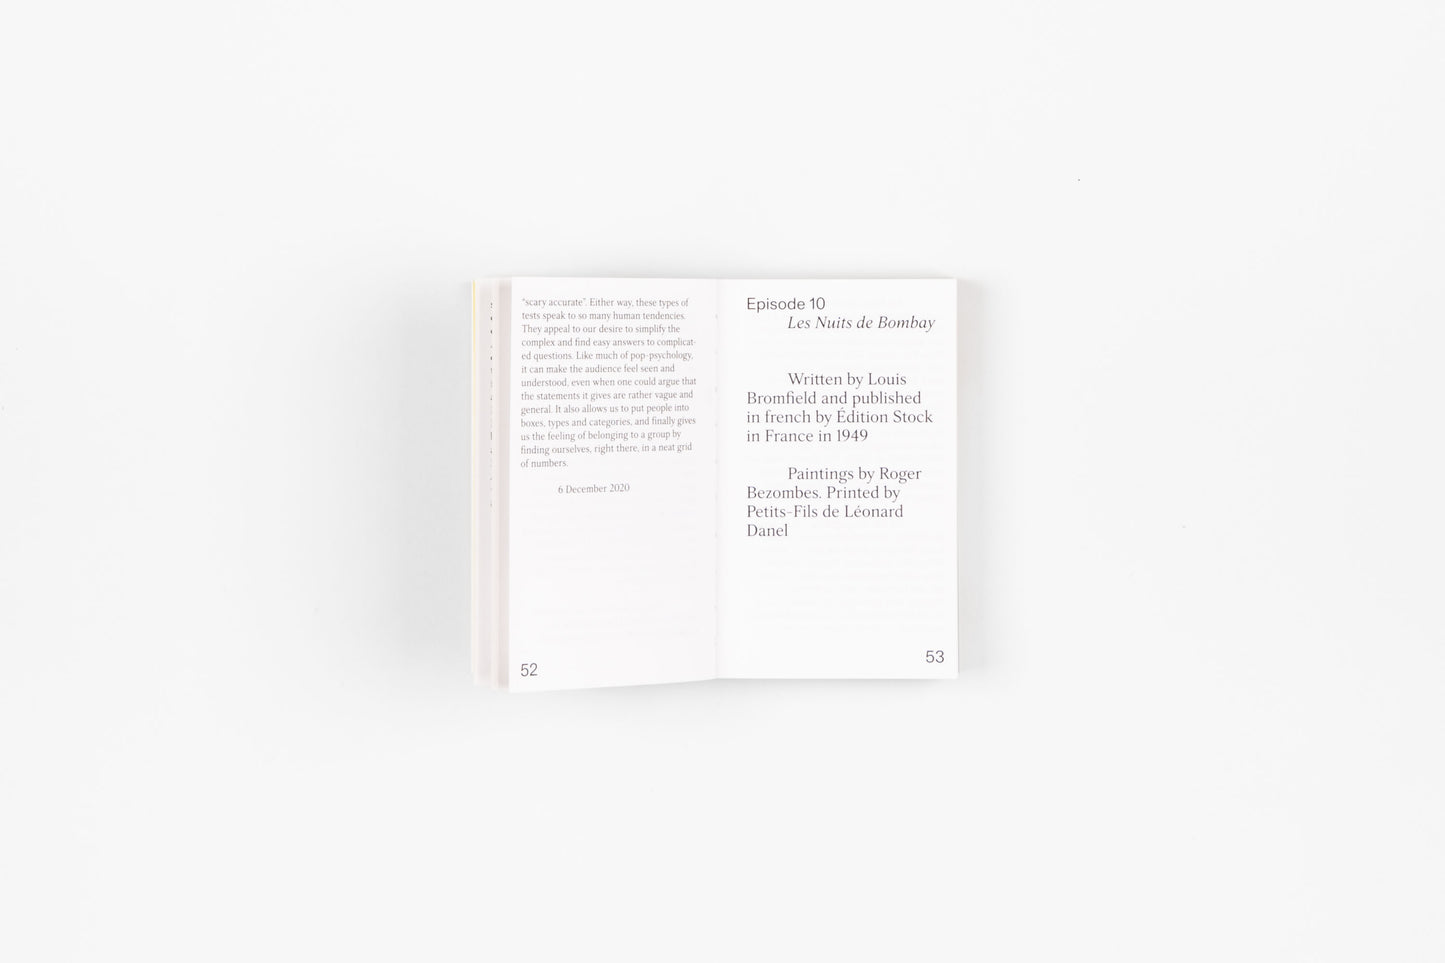 Notes on Book Design by Formal Settings